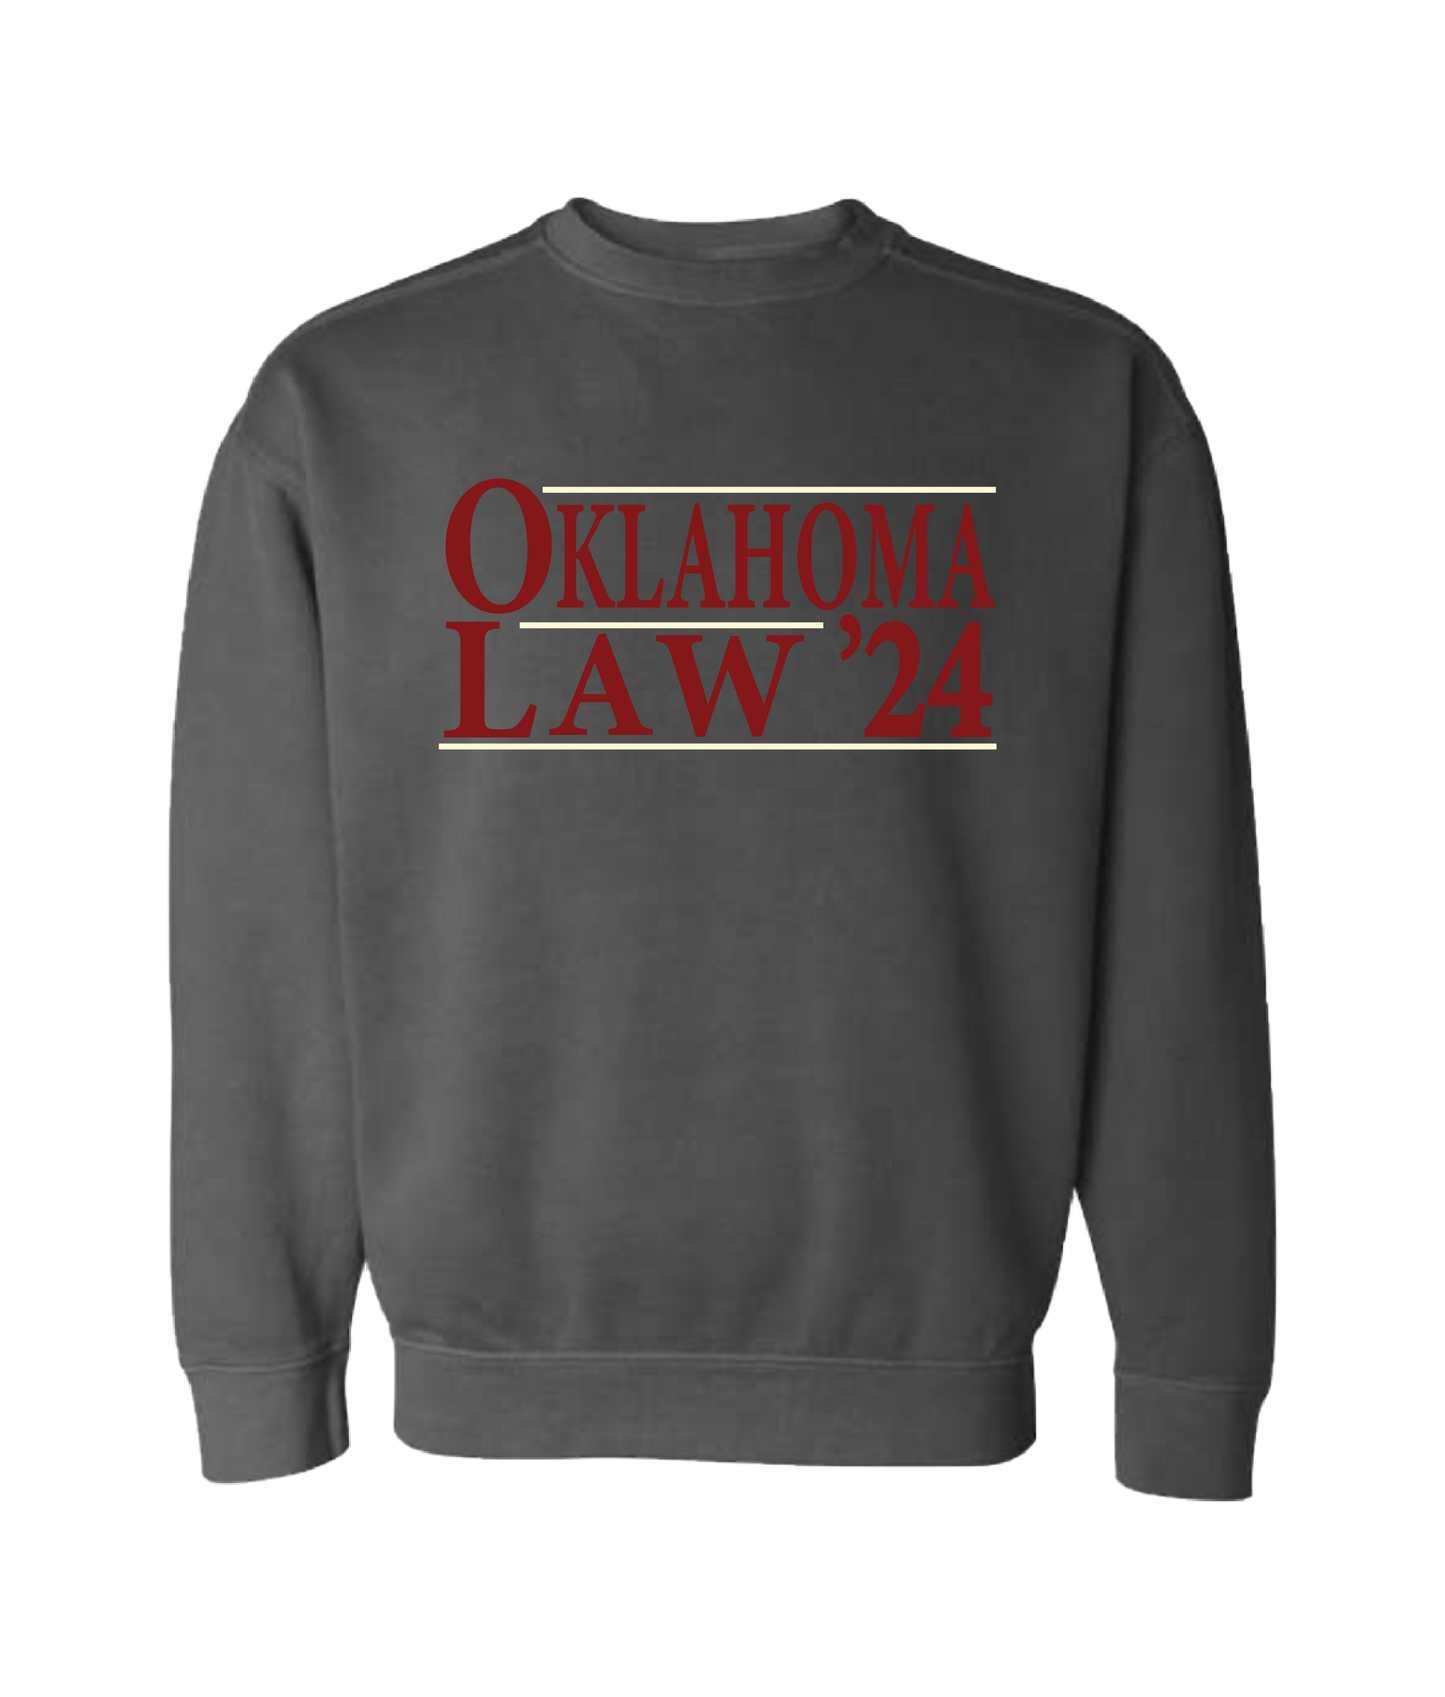 Oklahoma Law '24 campaign style (can customize year) sweatshirt